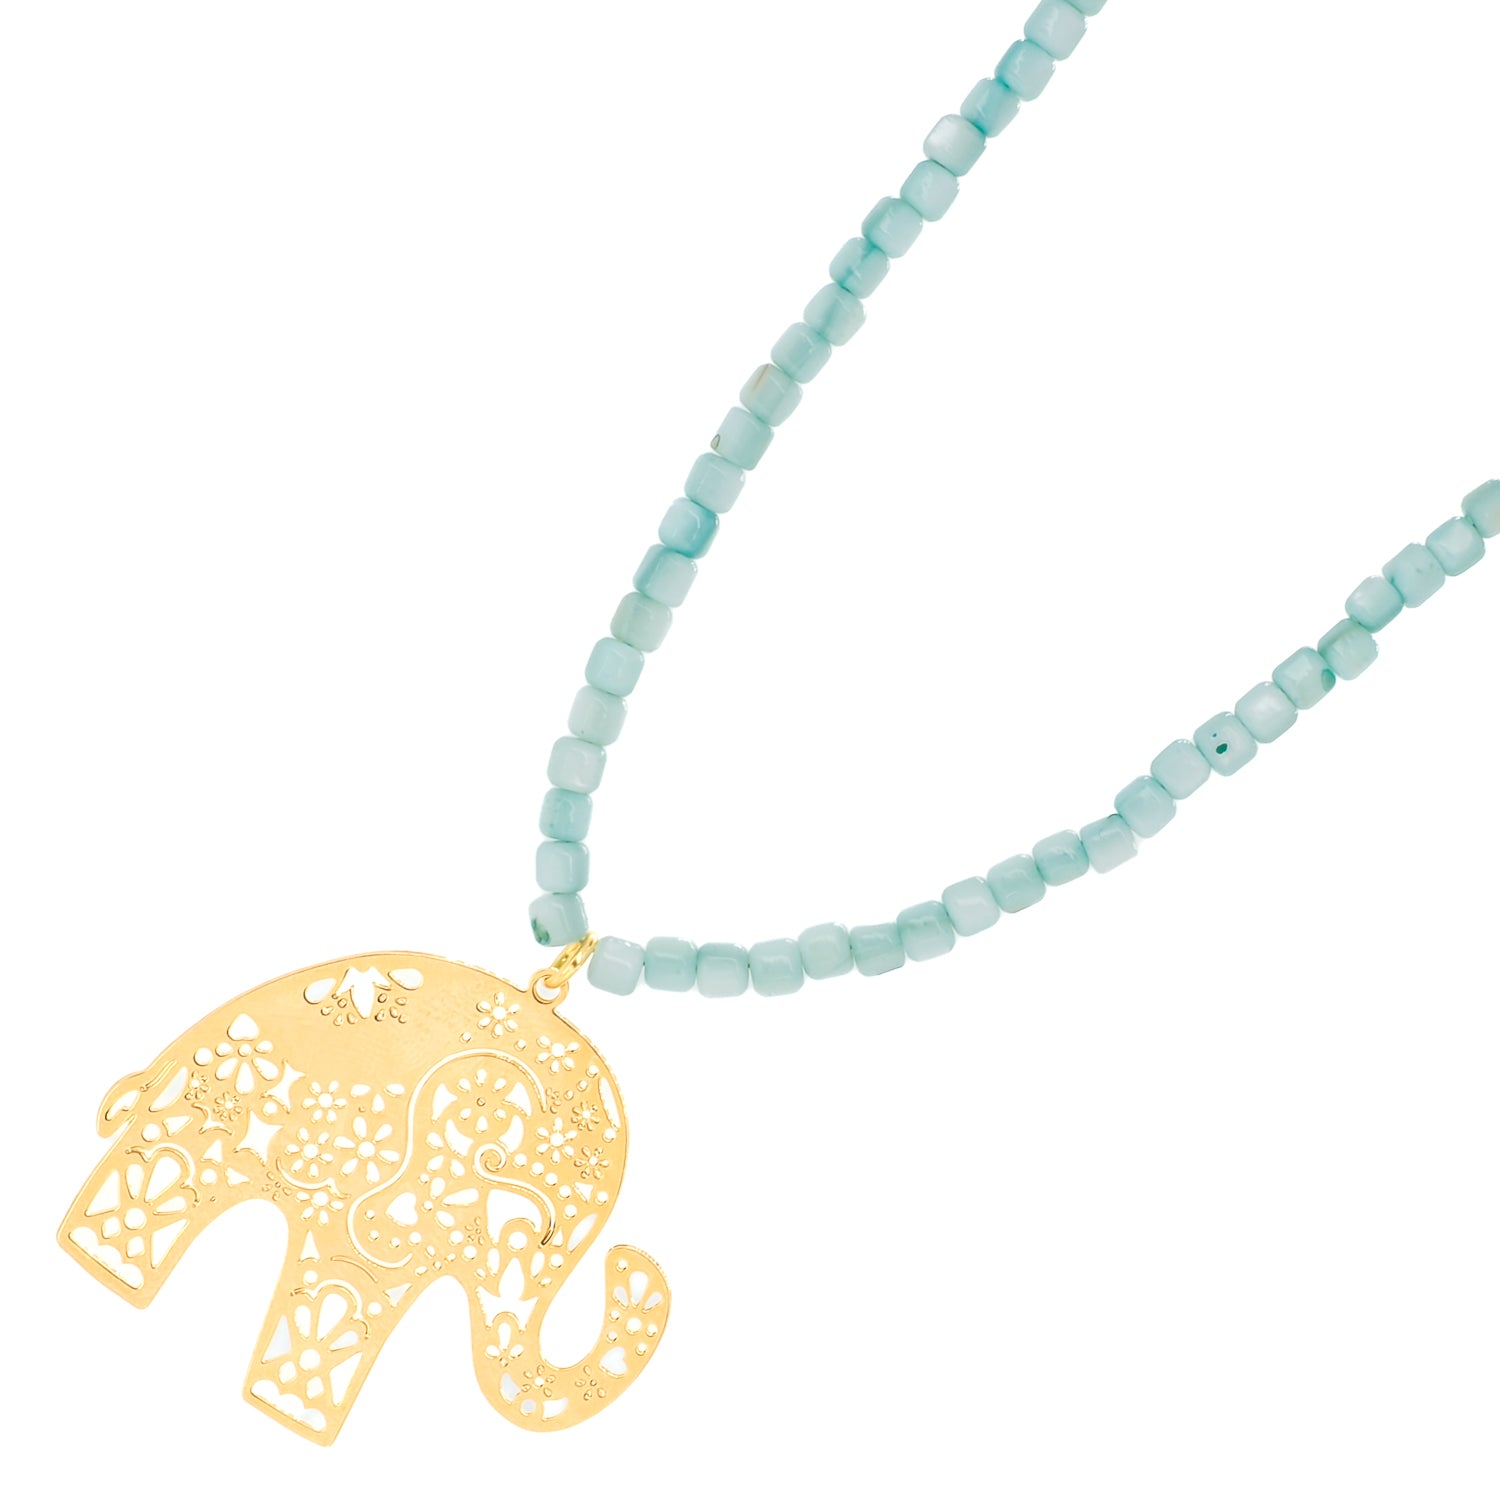 Elephant Pendant Necklace with Good Energy and Positive Vibes